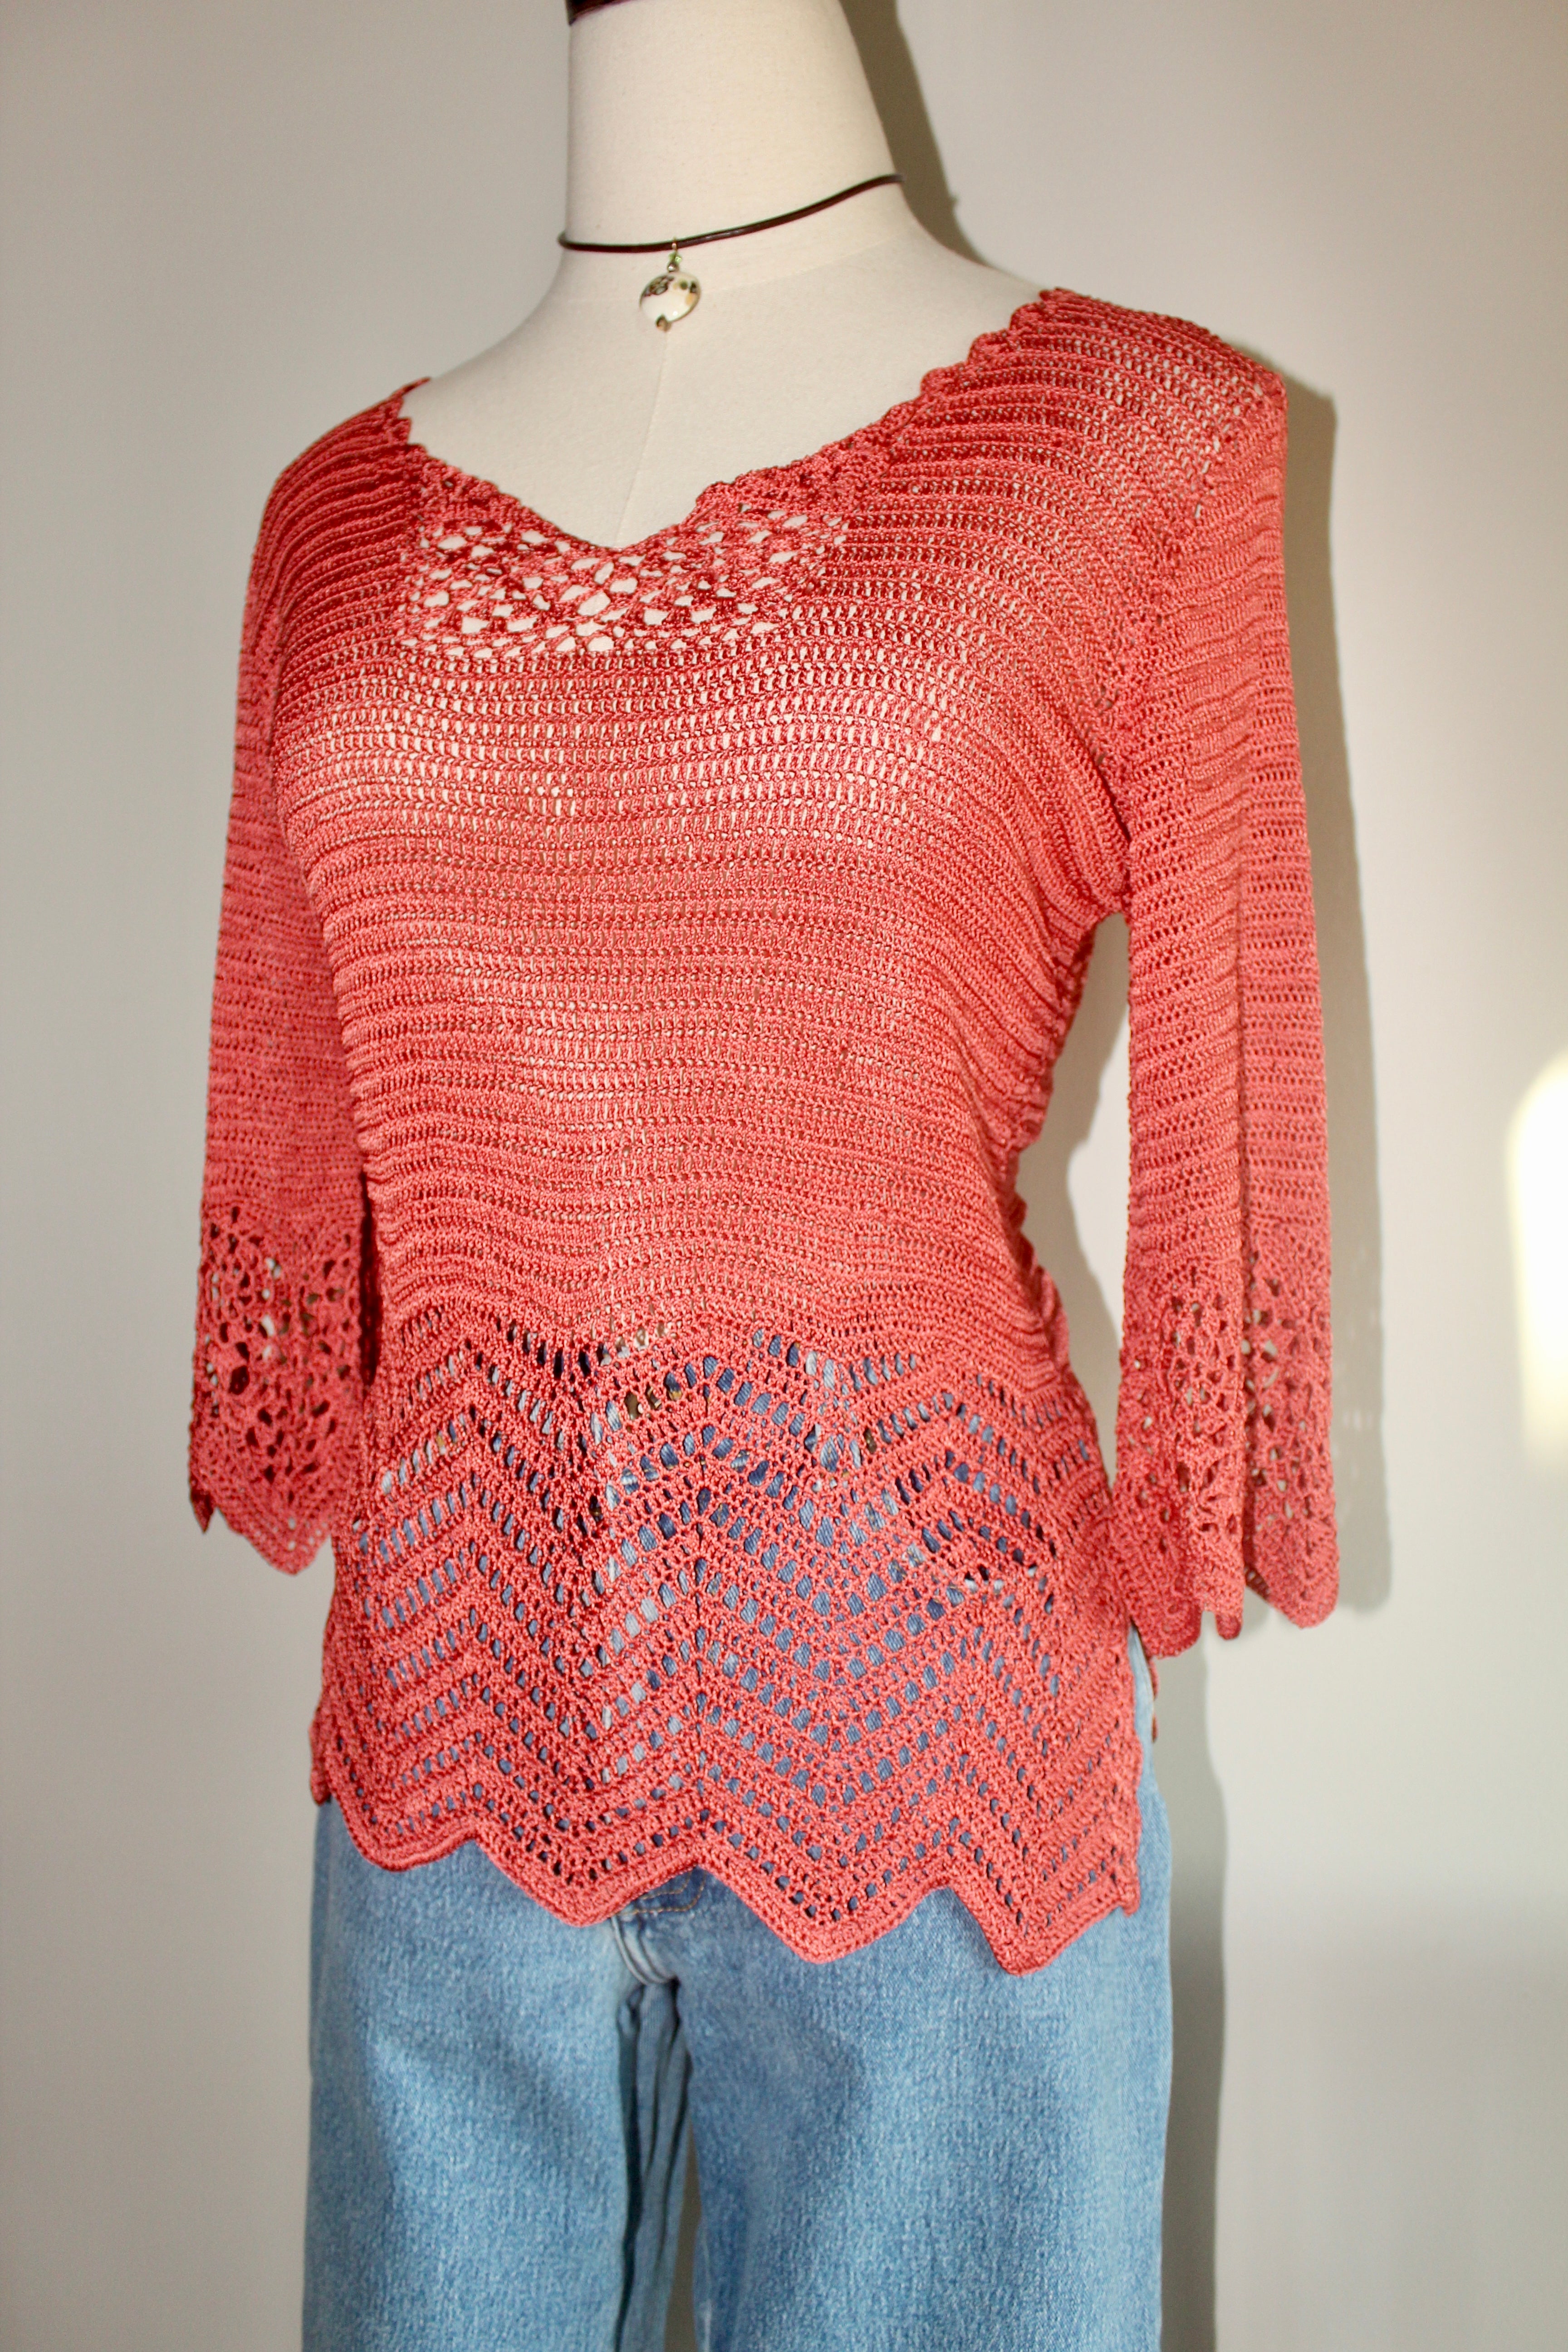 Vintage 90s Dainty Coral Knit Top (M)